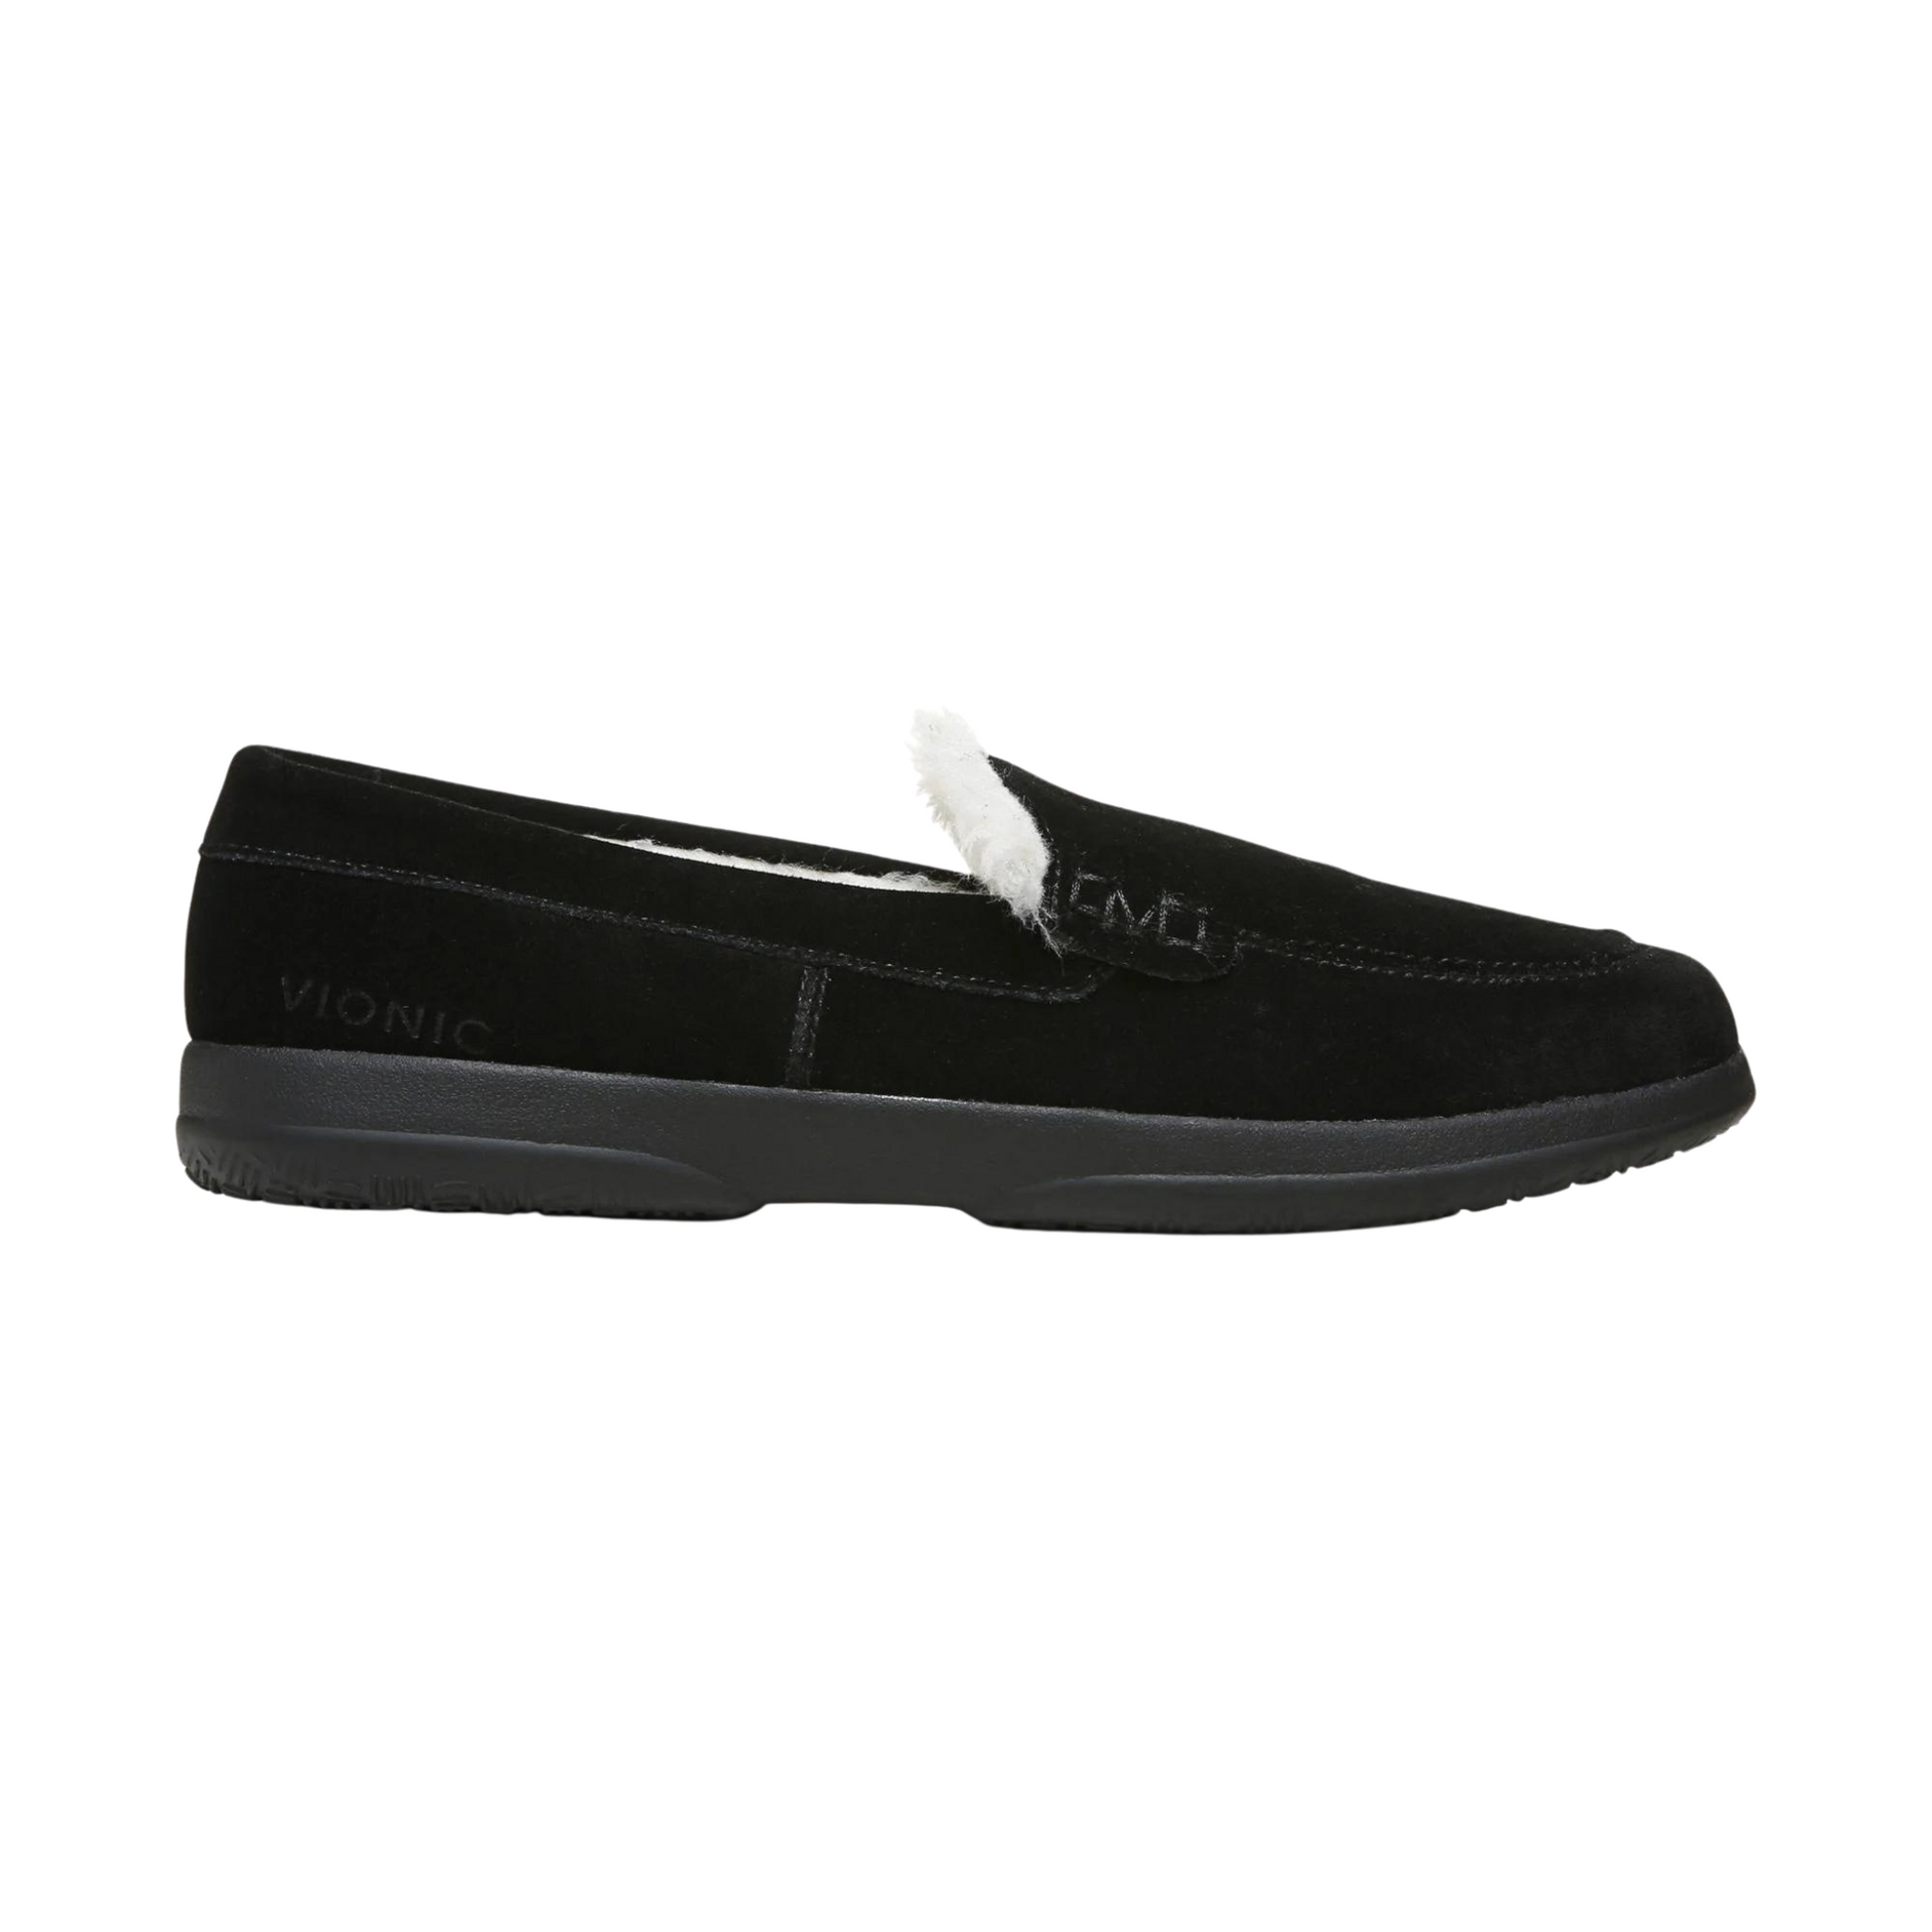 A right side view of a black suede slipper with a plush white interior.